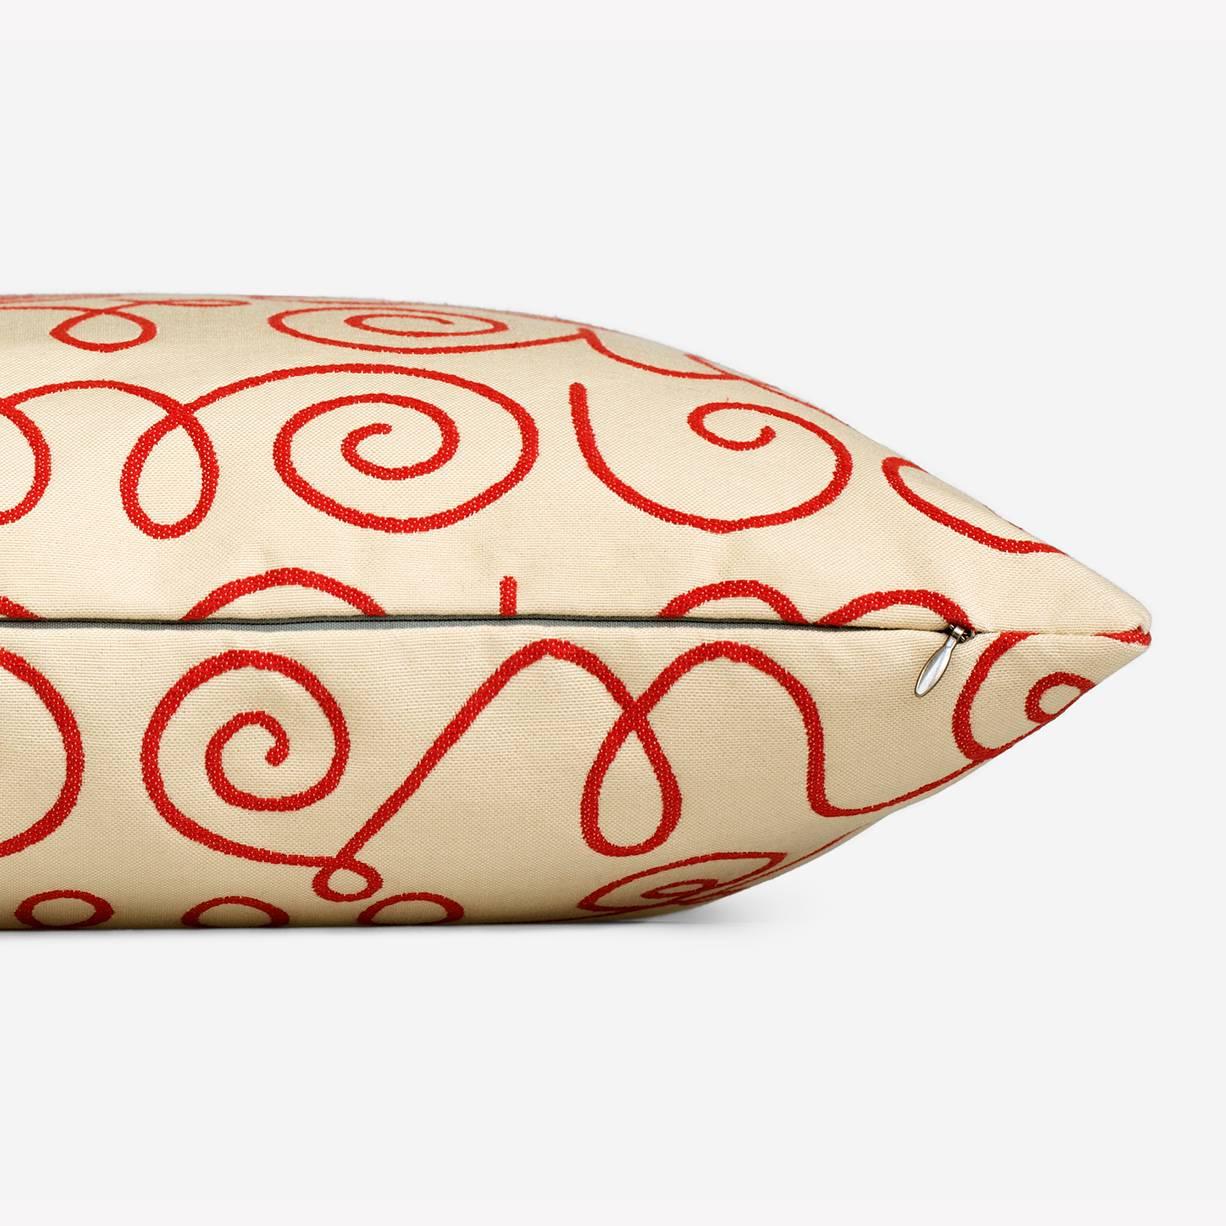 Maharam Pillow
Names by Alexander Girard 
001 Crimson on White

In his design work, Alexander Girard repeatedly explored an interest in the characters and symbols that comprise language. His pattern Names was included in a group showcasing this